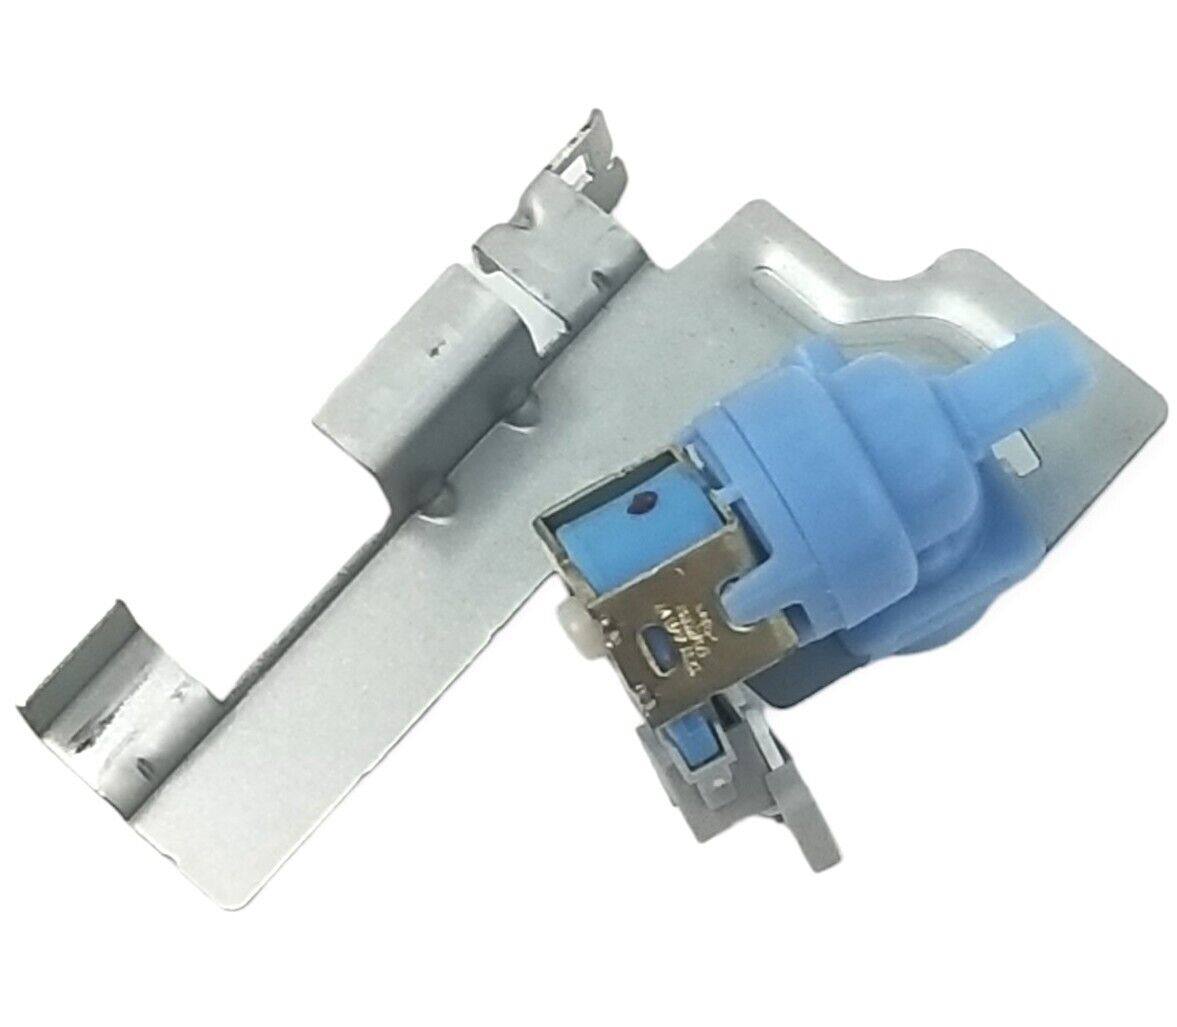 New OEM Replacement for Whirlpool Dishwasher Water Valve W11025970